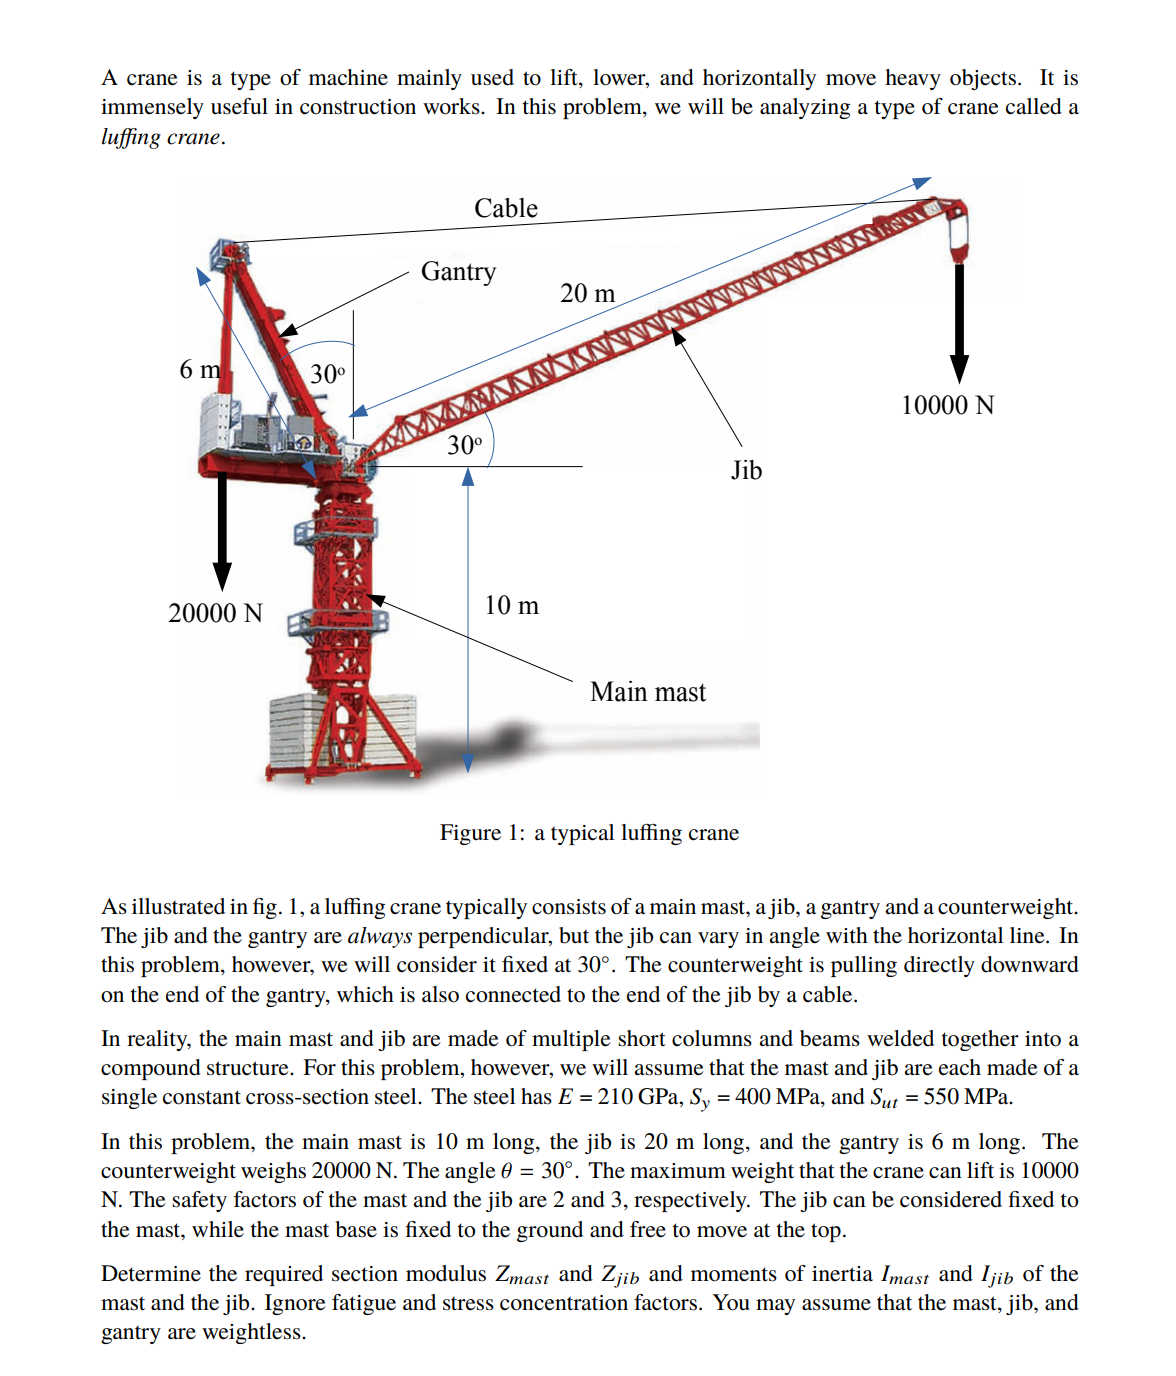 A crane is a type of machine mainly used to lift, lower, and horizontally move heavy objects. It is
immensely useful in construction works. In this problem, we will be analyzing a type of crane called a
luffing crane.
Cable
WESTI
20 m
6 m
10000 N
20000 N
Main mast
Figure 1: a typical luffing crane
As illustrated in fig. 1, a luffing crane typically consists of a main mast, a jib, a gantry and a counterweight.
The jib and the gantry are always perpendicular, but the jib can vary in angle with the horizontal line. In
this problem, however, we will consider it fixed at 30°. The counterweight is pulling directly downward
on the end of the gantry, which is also connected to the end of the jib by a cable.
In reality, the main mast and jib are made of multiple short columns and beams welded together into a
compound structure. For this problem, however, we will assume that the mast and jib are each made of a
single constant cross-section steel. The steel has E = 210 GPa, Sy = 400 MPa, and Sut = 550 MPa.
In this problem, the main mast is 10 m long, the jib is 20 m long, and the gantry is 6 m long. The
counterweight weighs 20000 N. The angle 0 = 30°. The maximum weight that the crane can lift is 10000
N. The safety factors of the mast and the jib are 2 and 3, respectively. The jib can be considered fixed to
the mast, while the mast base is fixed to the ground and free to move at the top.
Determine the required section modulus Zmast and Zjib and moments of inertia Imast and Ijib of the
mast and the jib. Ignore fatigue and stress concentration factors. You may assume that the mast, jib, and
gantry are weightless.
30⁰
Gantry
30⁰
10 m
Jib